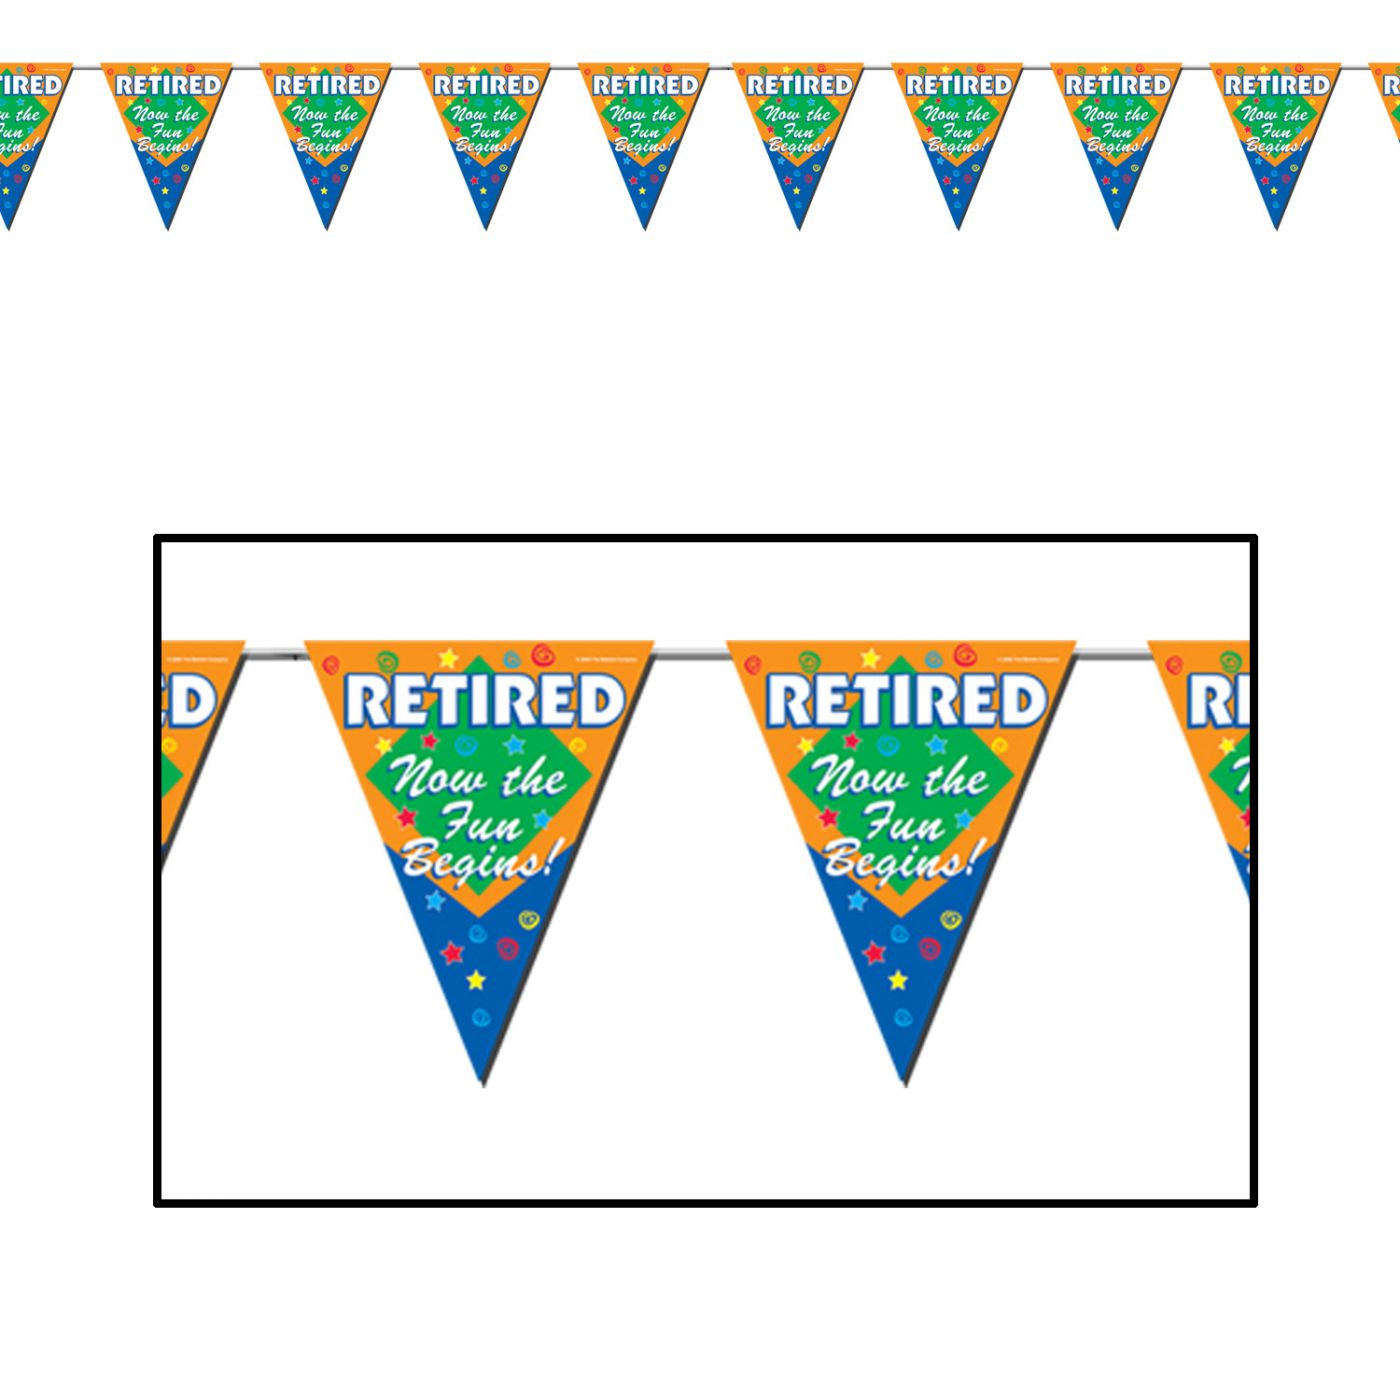 Retired The Fun Begins! Pennant Banner image